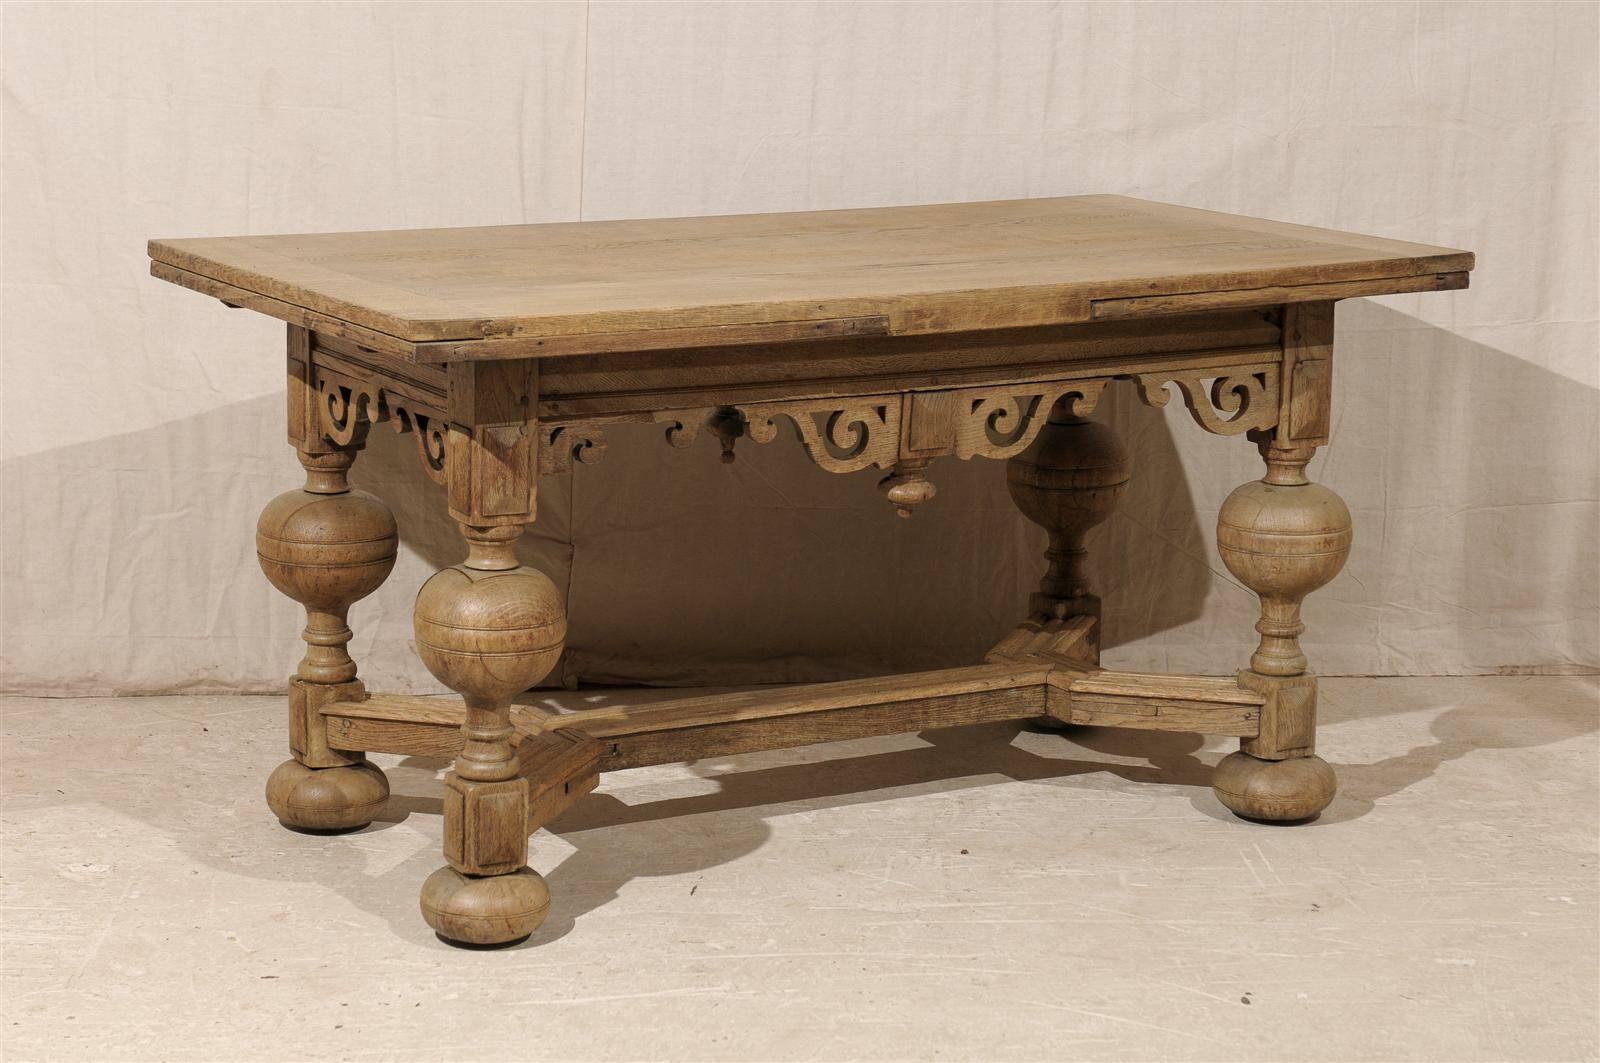 An exquisite Swedish early 19th century Baroque style wooden table / desk.

With its richly carved apron featuring volute ornaments, natural finish, cross stretcher and turned legs, this Swedish table will make a beautiful statement in your home.